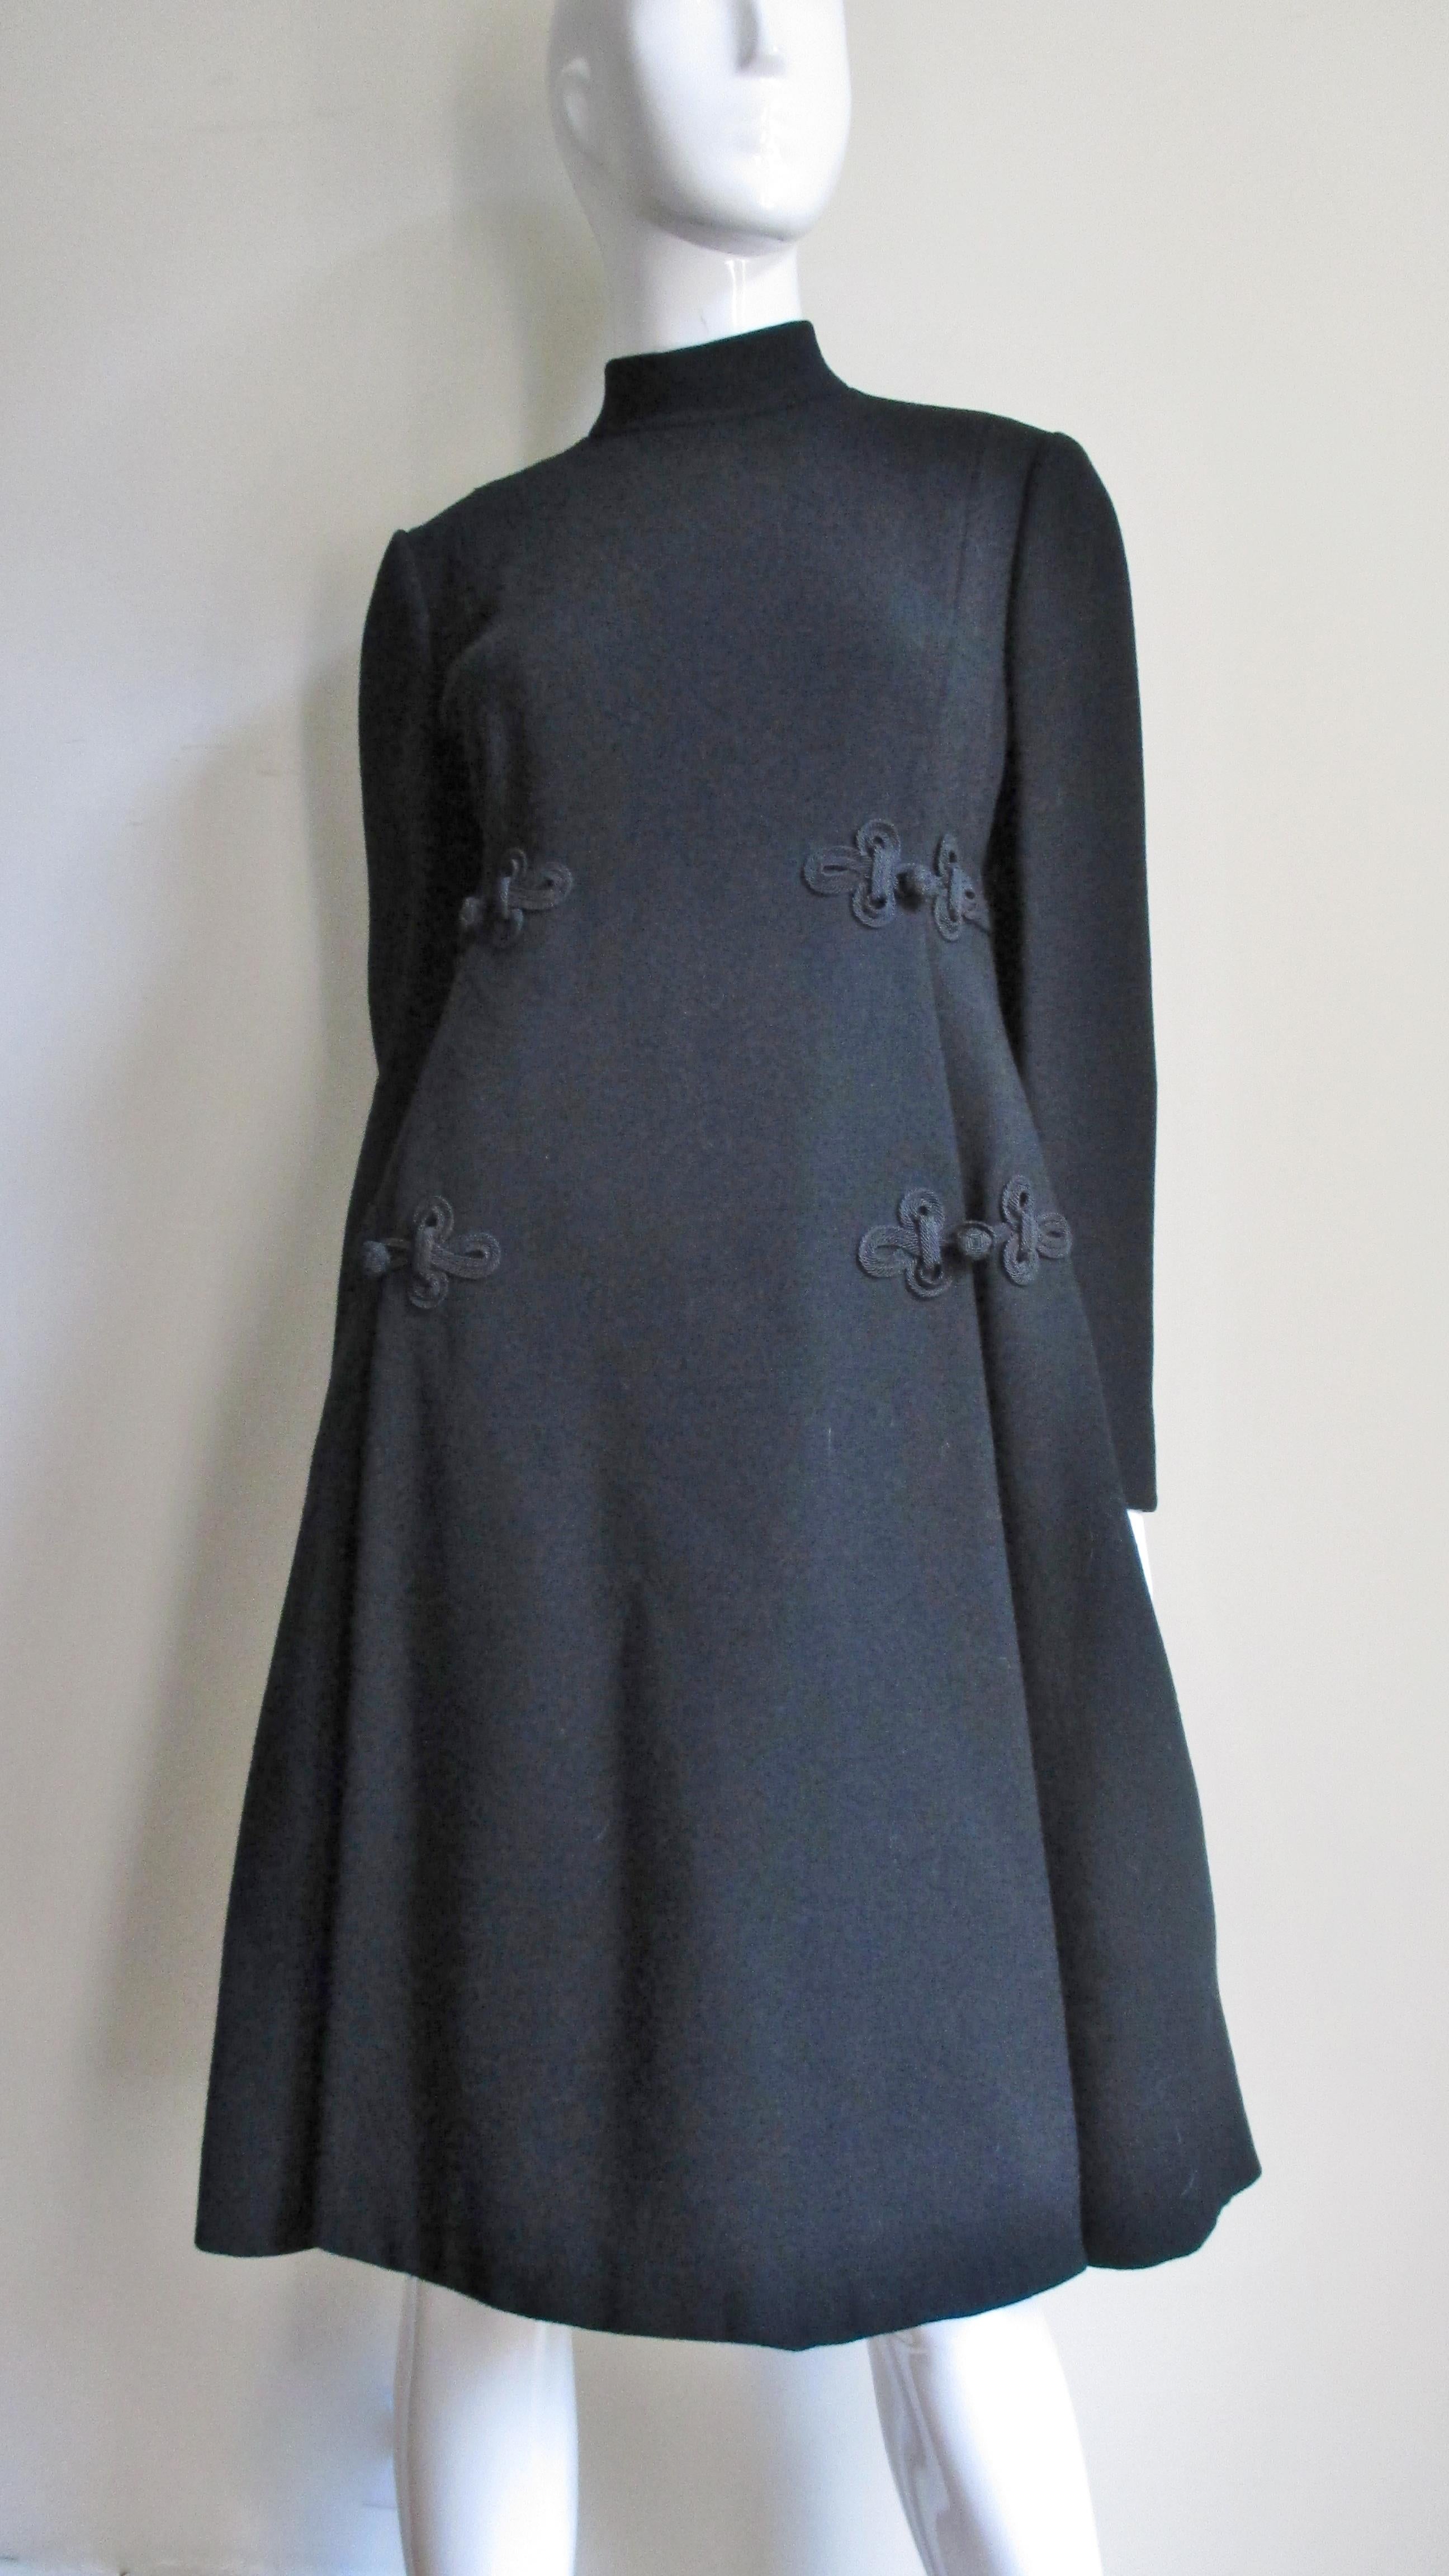 A fabulous rich black wool dress from Geoffrey Beene. It has long sleeves, a small stand up collar and and an inverted fold on either side of the center front. There are detailed silk braided frogs with knots at the side upper and lower waist level.